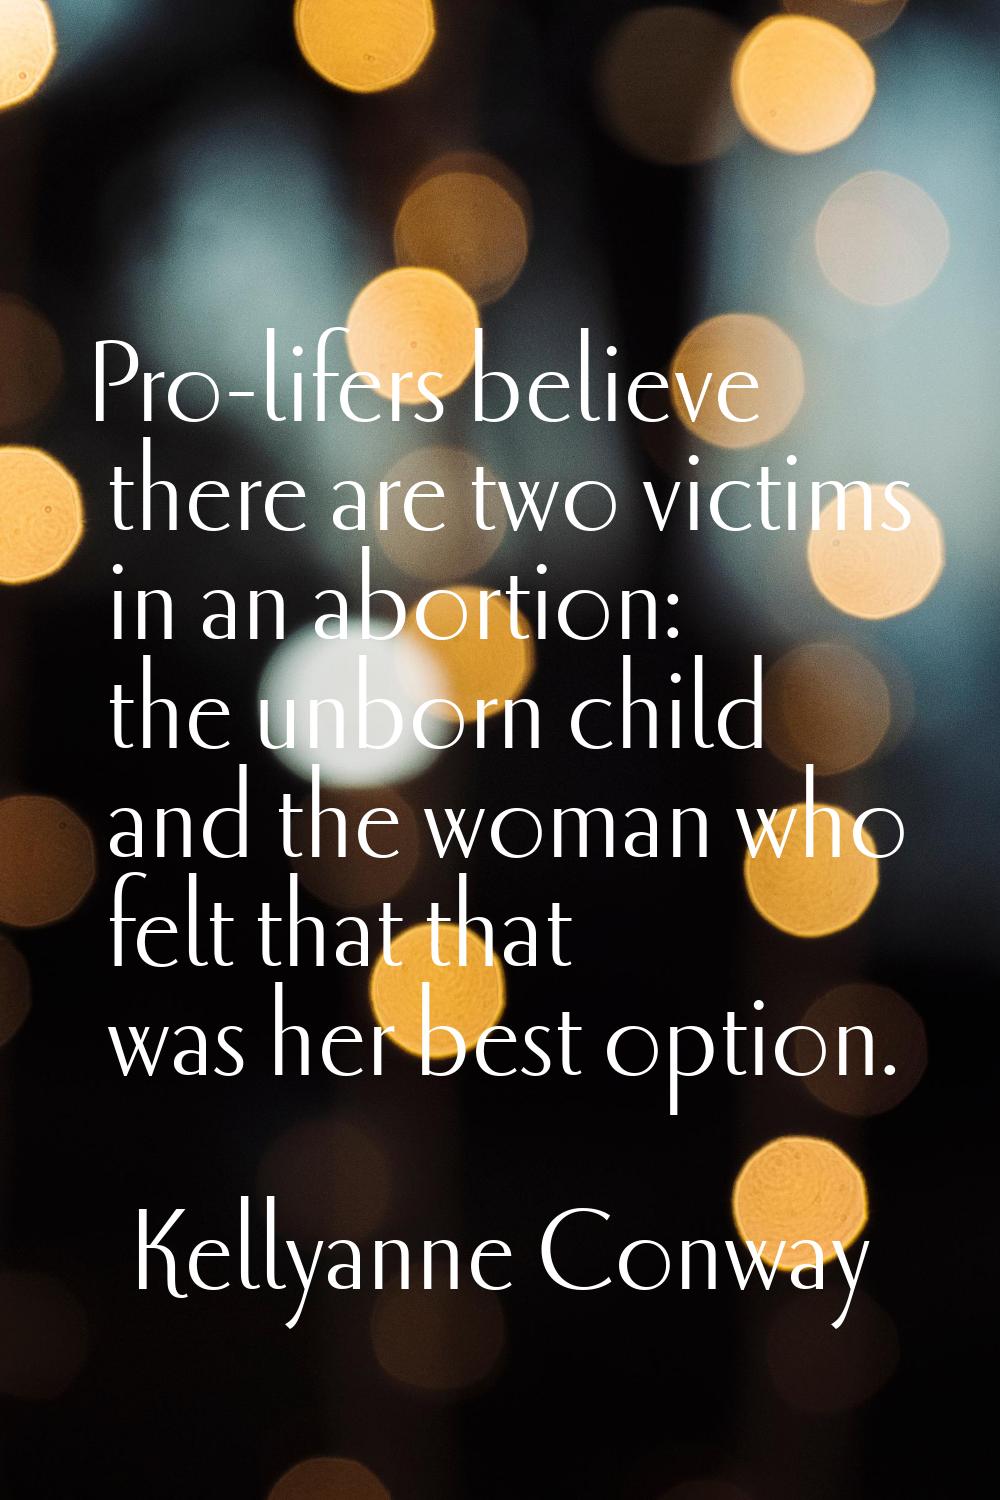 Pro-lifers believe there are two victims in an abortion: the unborn child and the woman who felt th